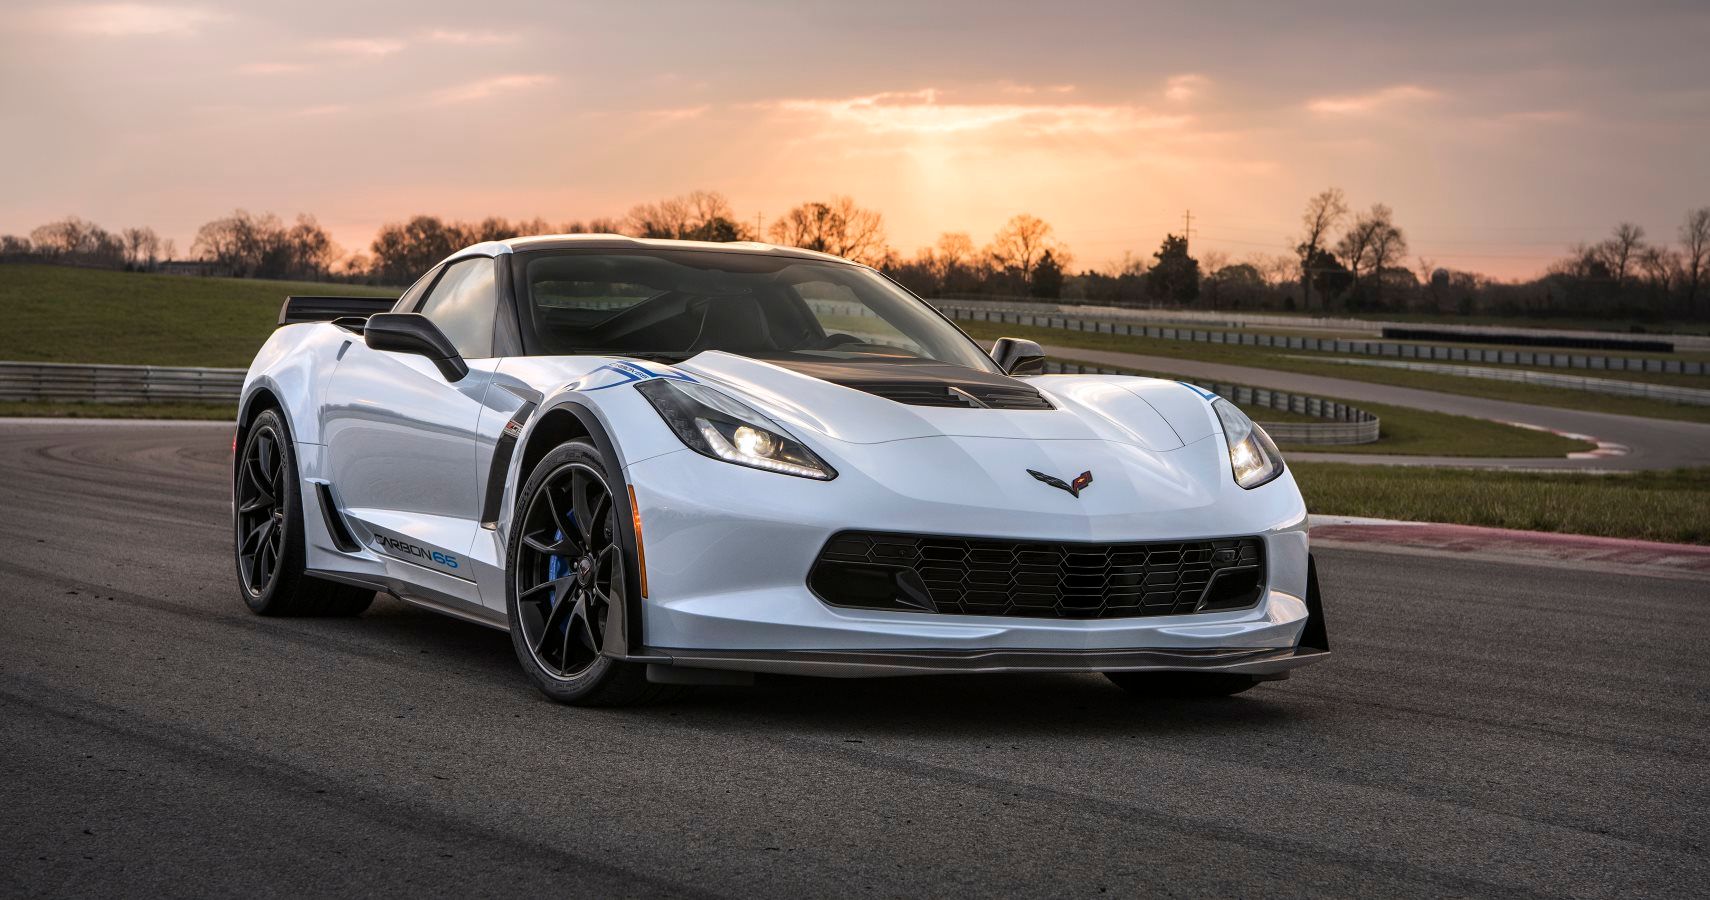 Available on the Z06 3LZ trim, the Carbon 65 Edition celebrates 65 years of Corvette with a new Ceramic Matrix Gray paint color and visible carbon fiber exterior elements, including a carbon fiber hood and rear spoiler.